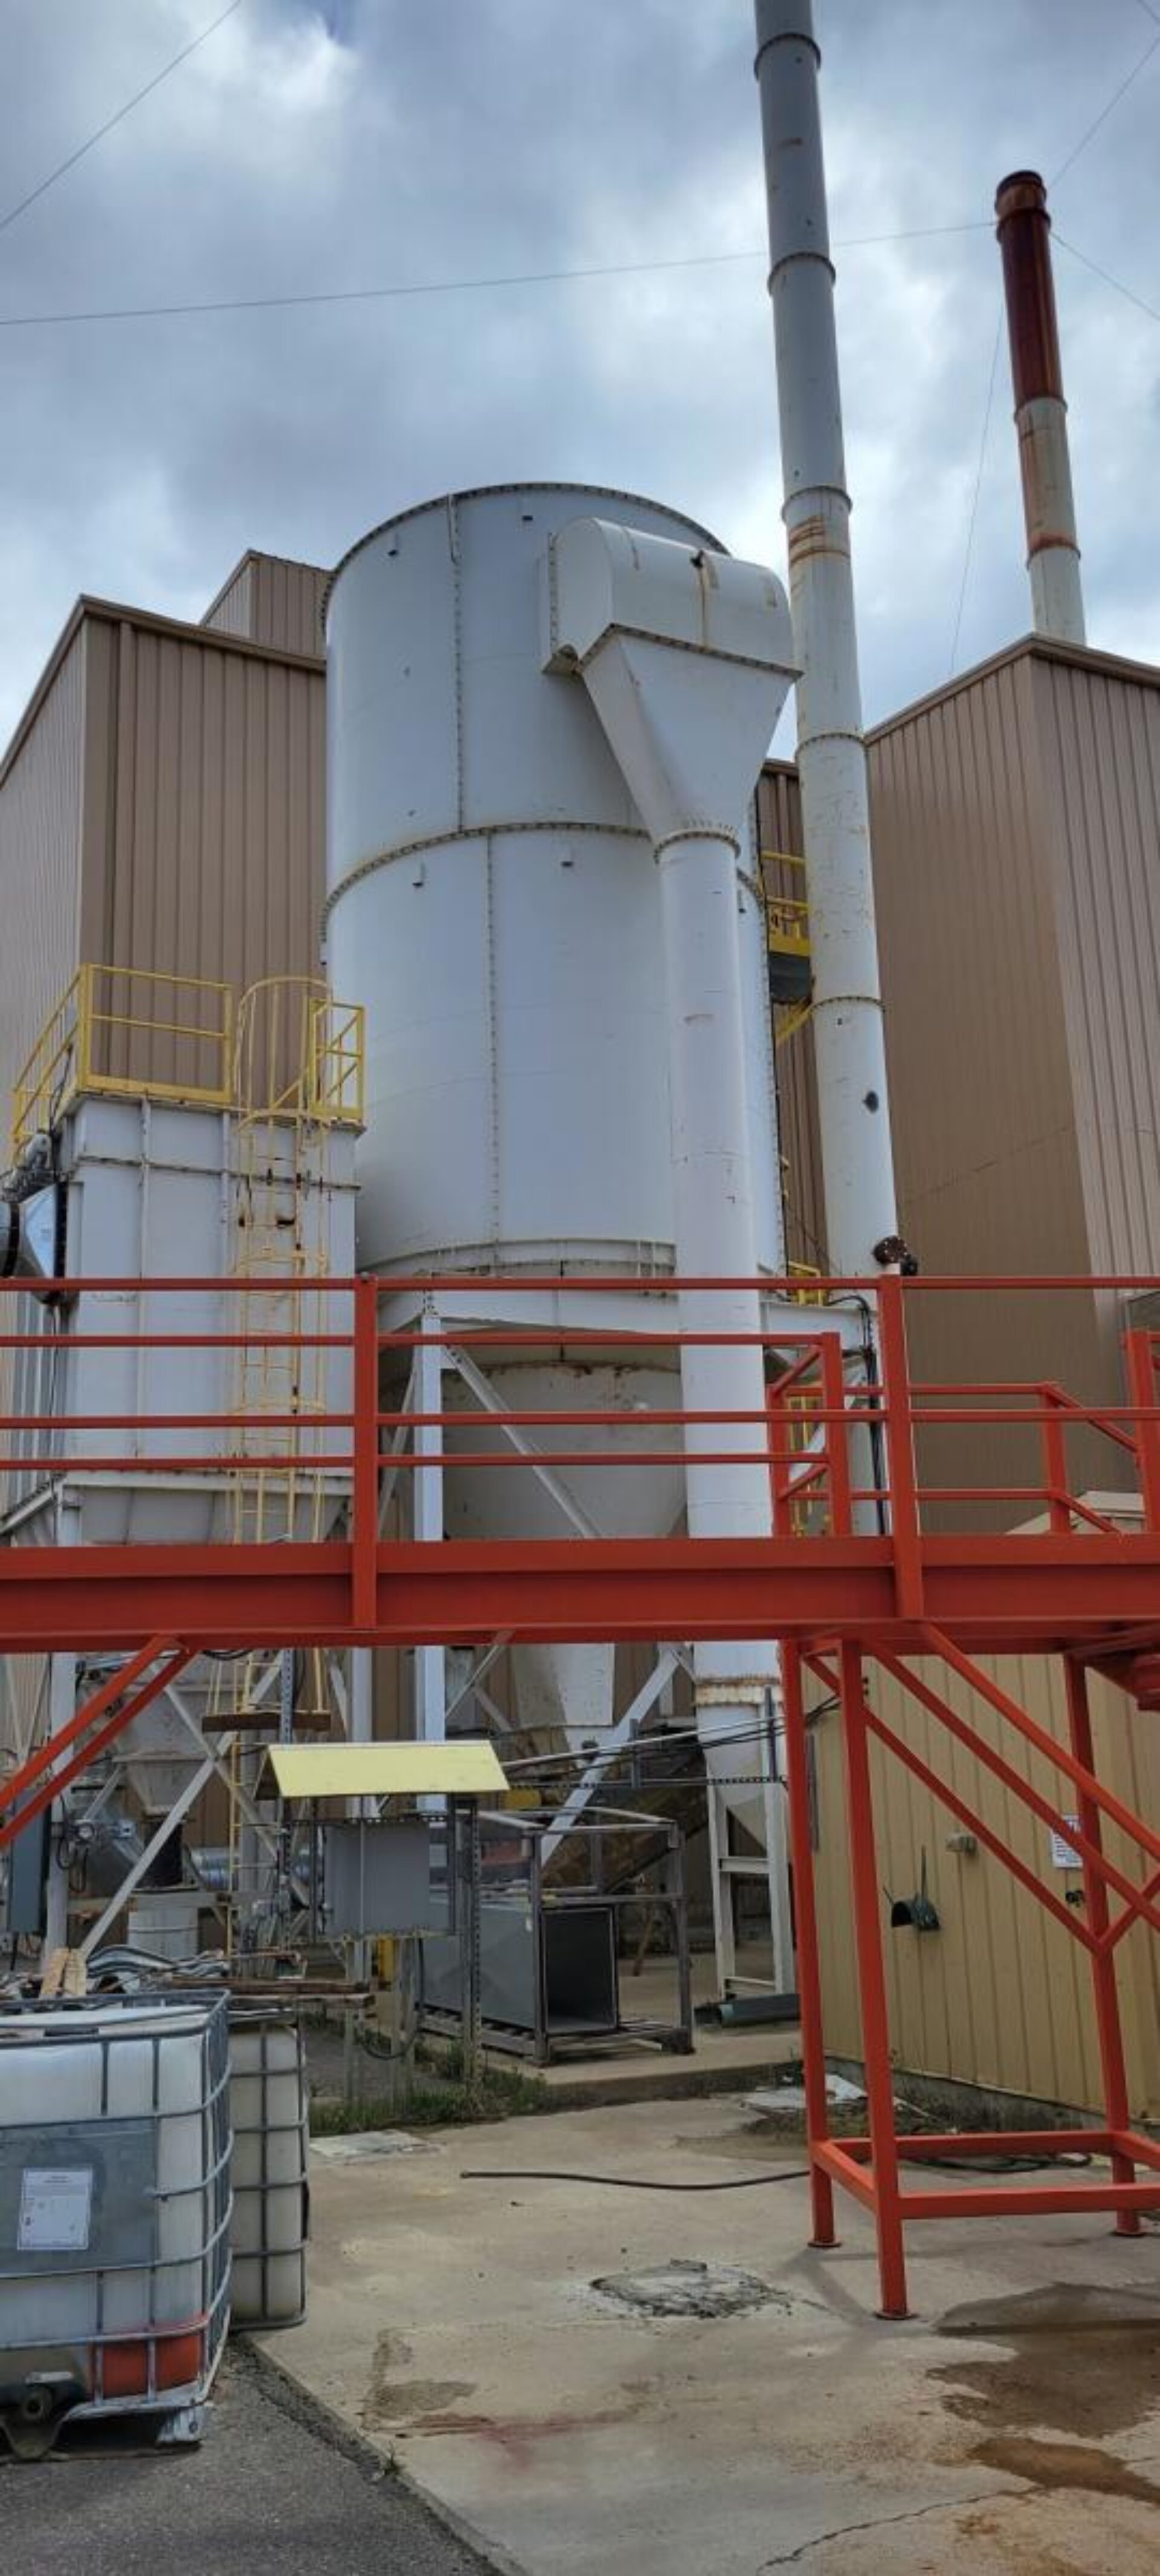 000 cfm Mac Process #144MCF572 Baghouse Dust Collector - AM20634